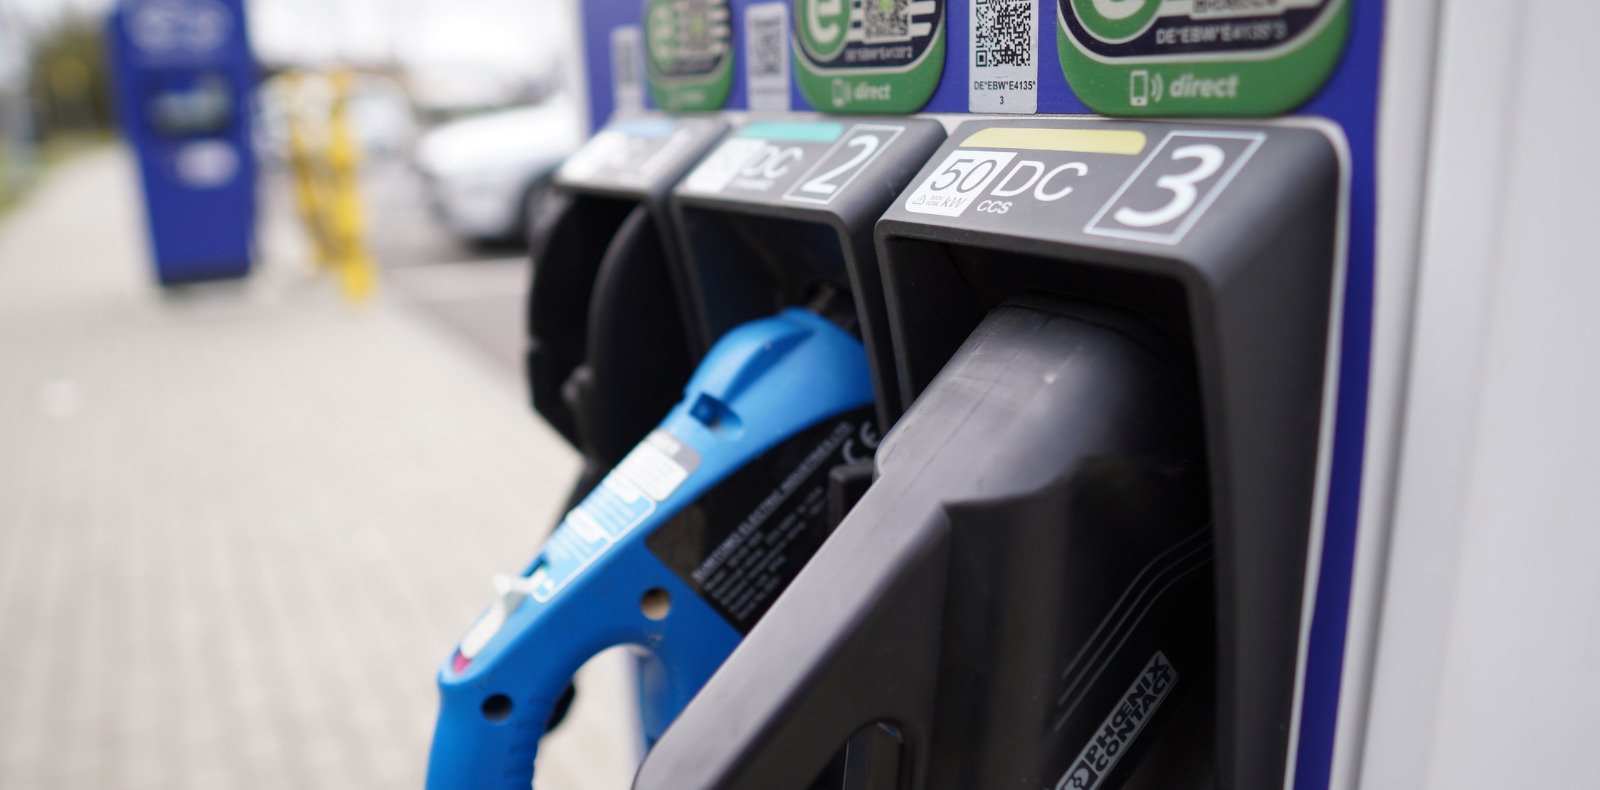 Concerns as Fuel Shortage Impact on Sterling Value 'Unclear'